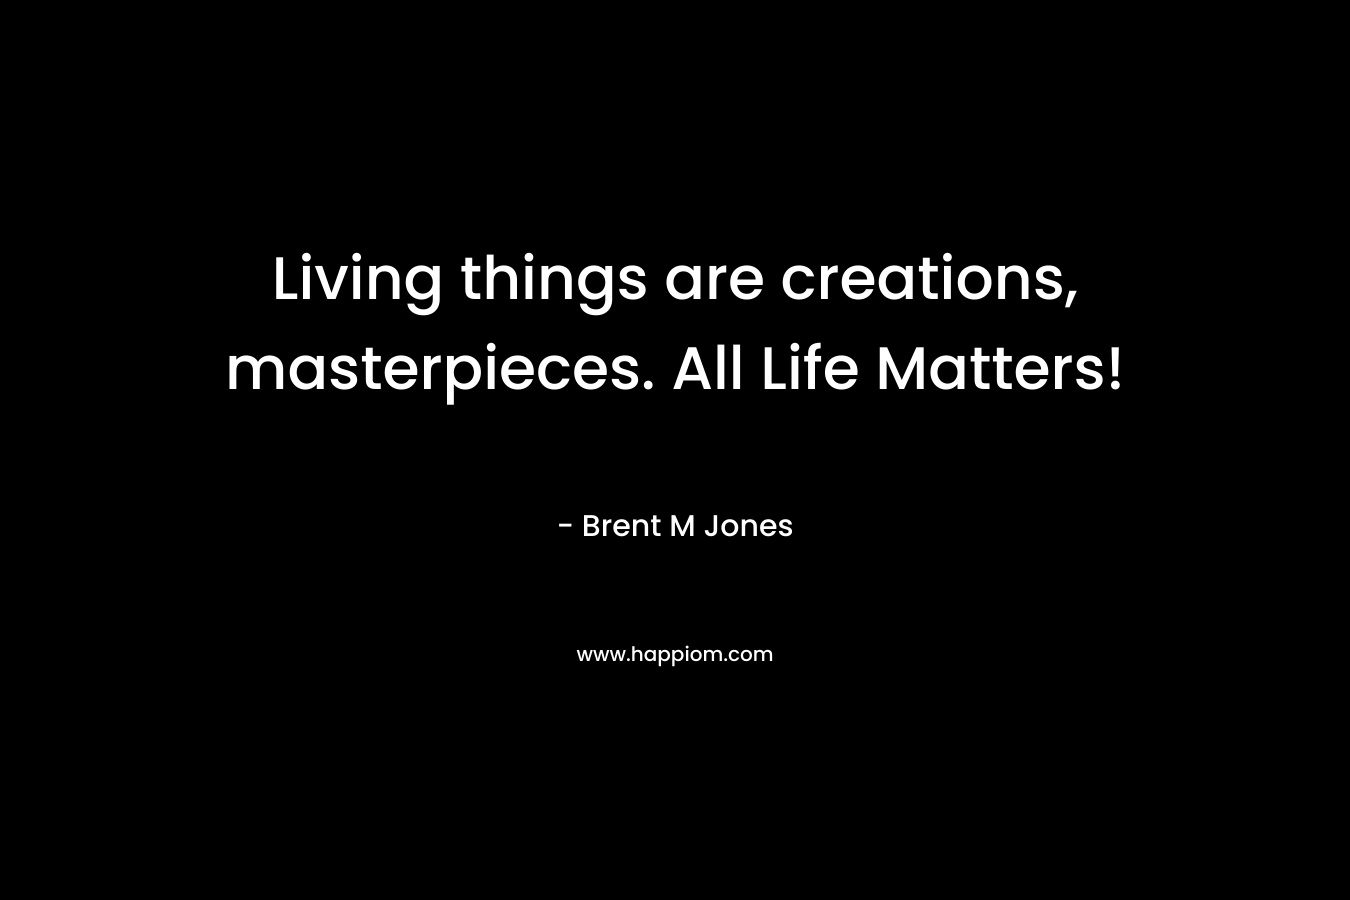 Living things are creations, masterpieces. All Life Matters! – Brent M Jones